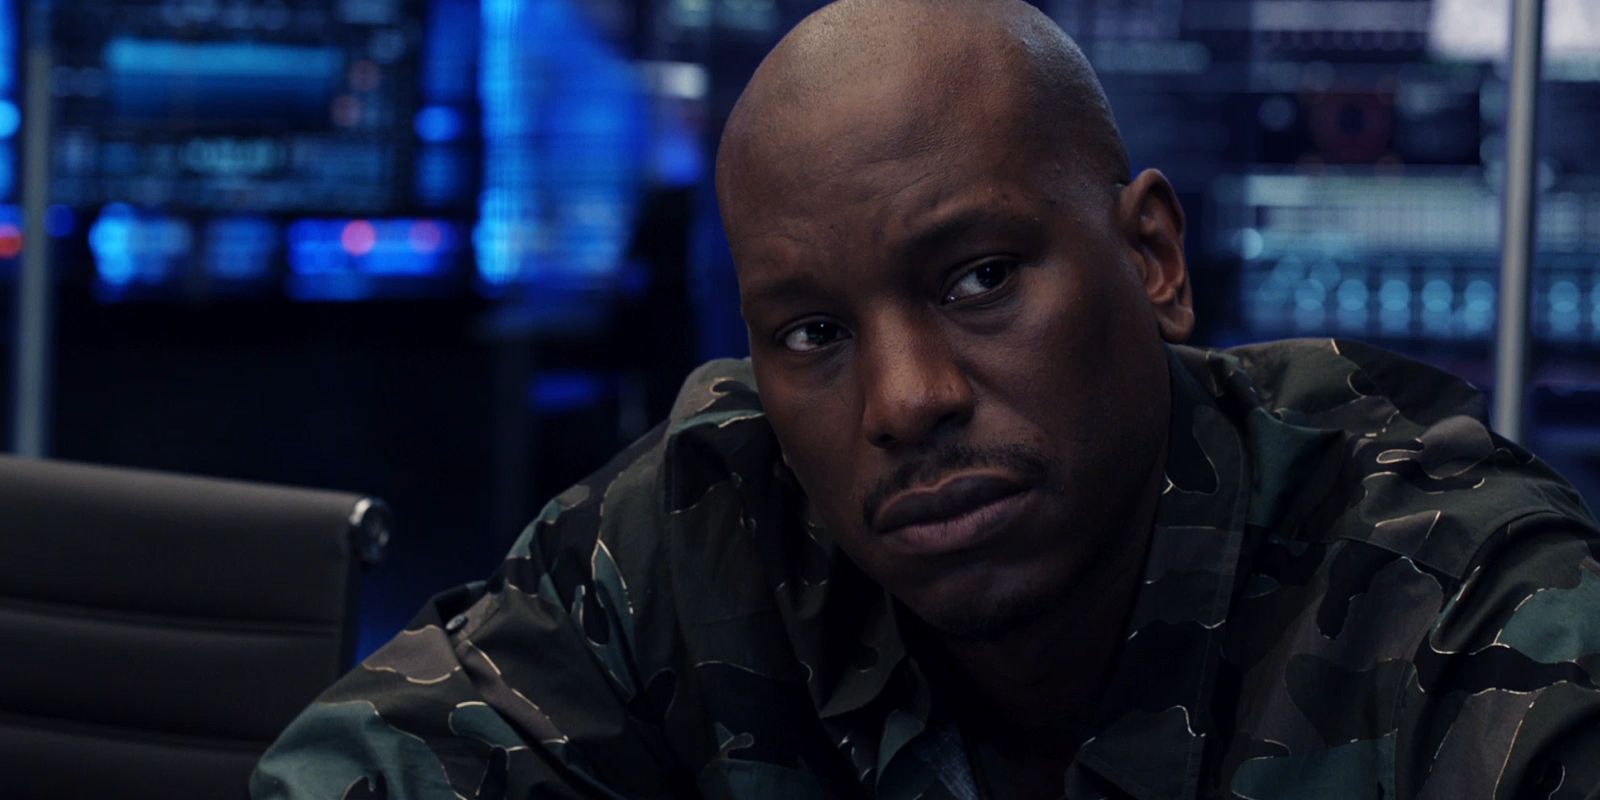 Tyrese Gibson as Roman Pearce looking sideways in Fate of the Furious